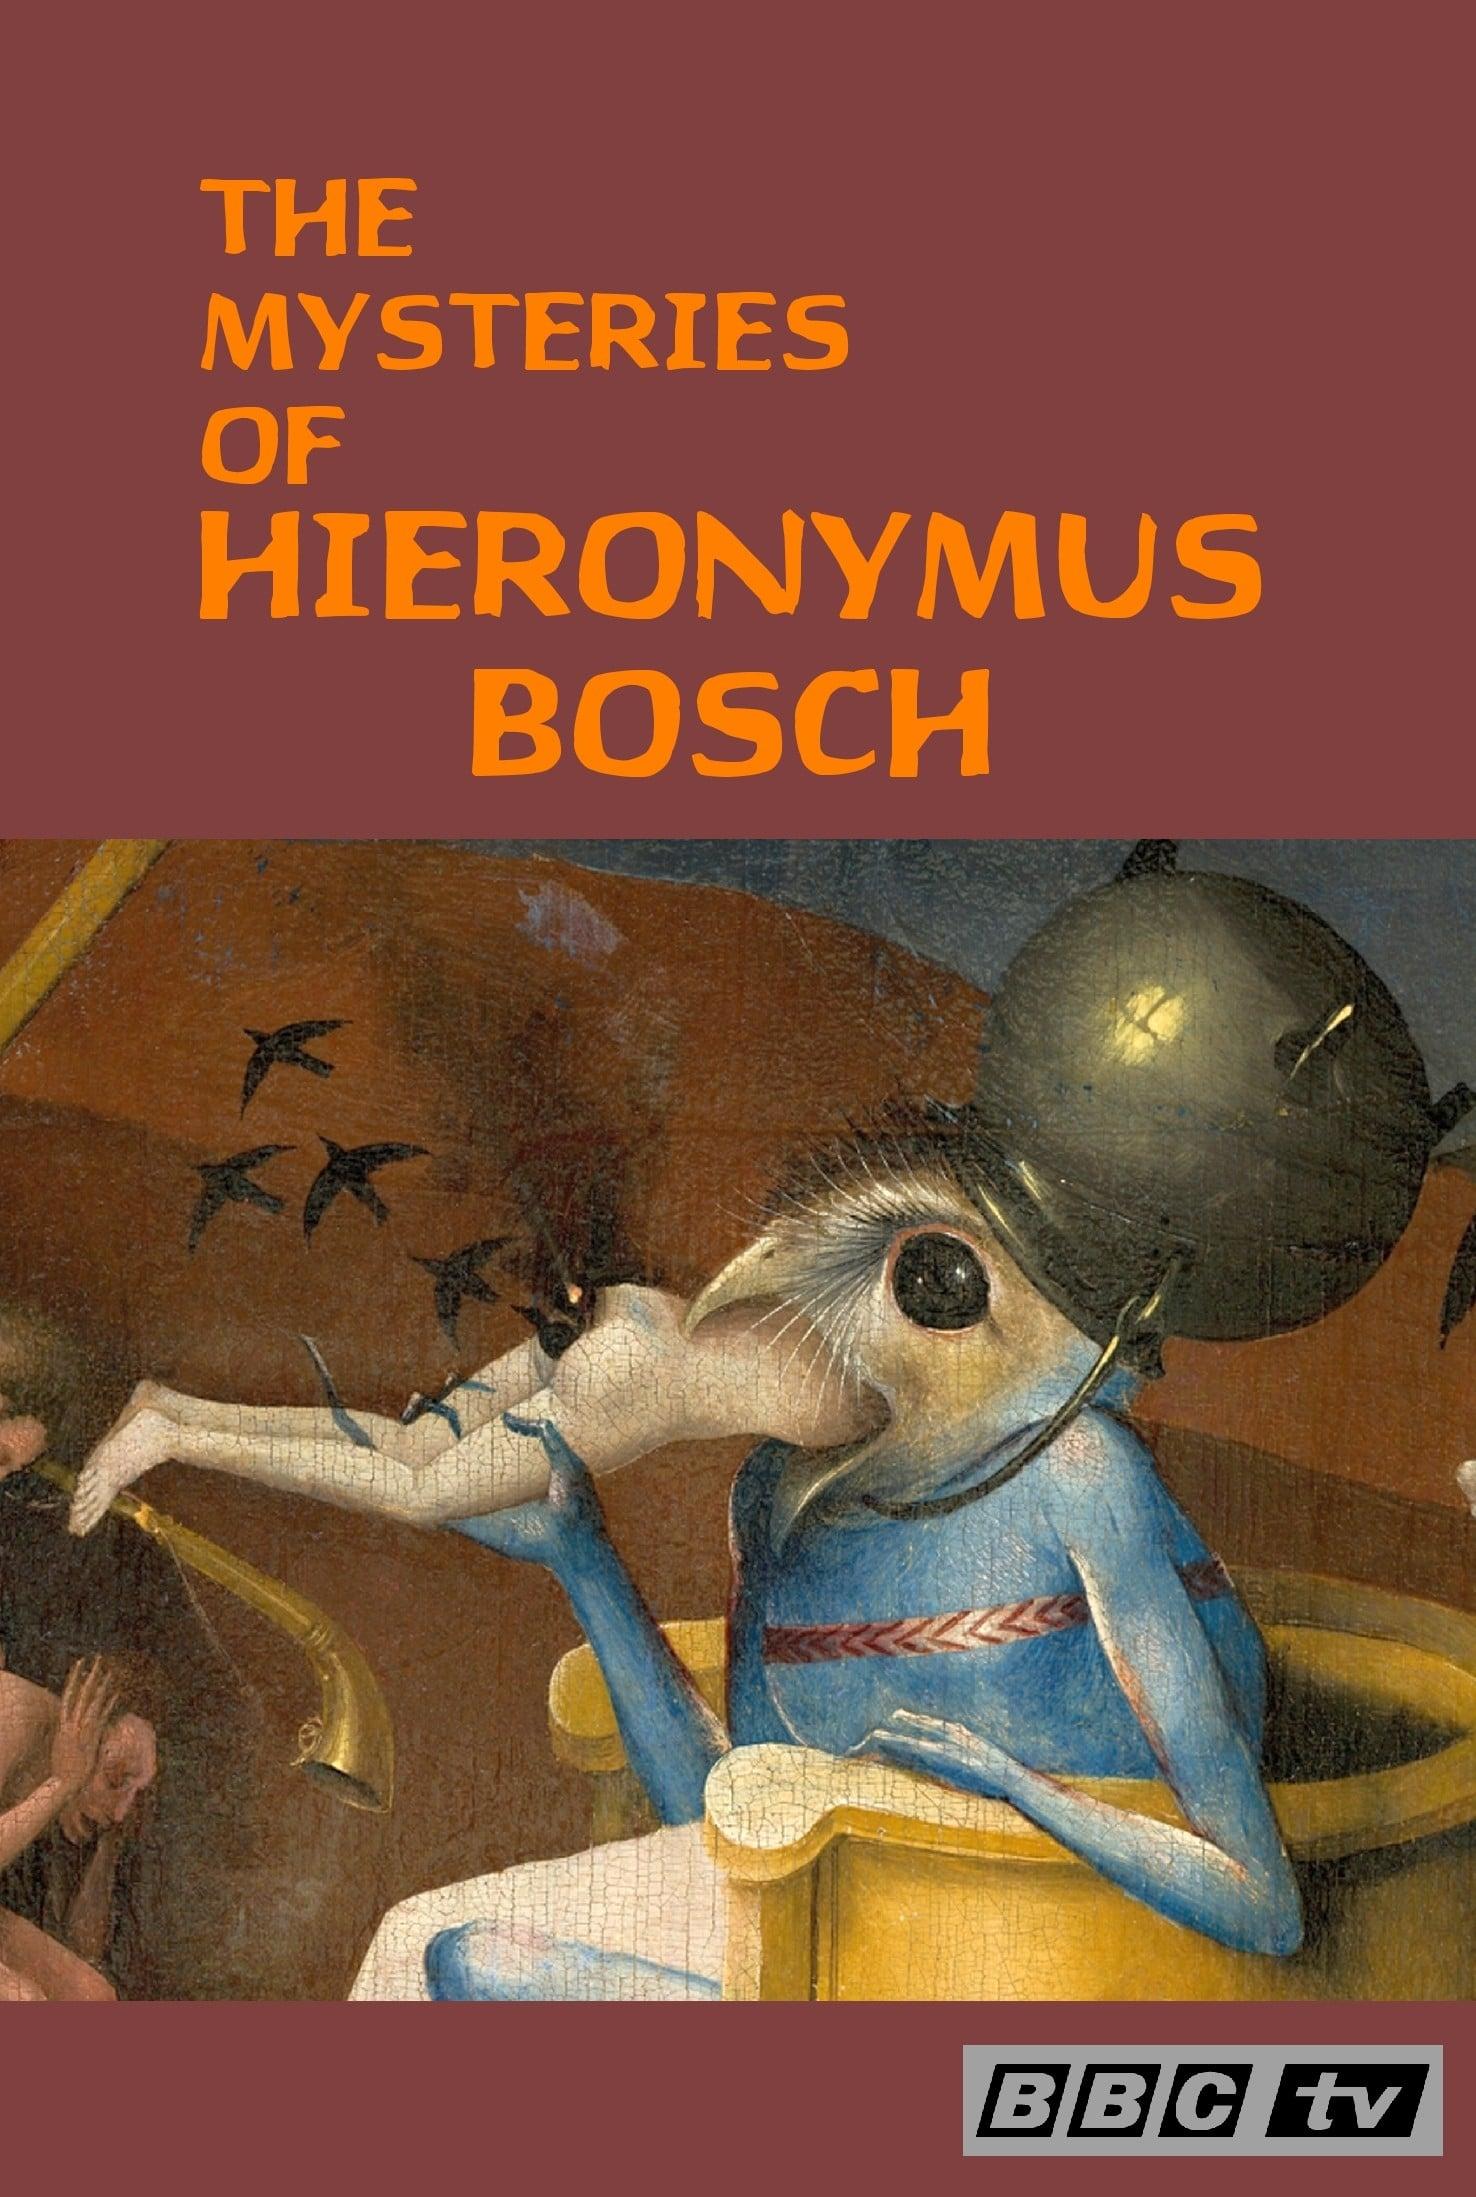 Hieronymus Bosch: The Mysteries of Hieronymus Bosch poster